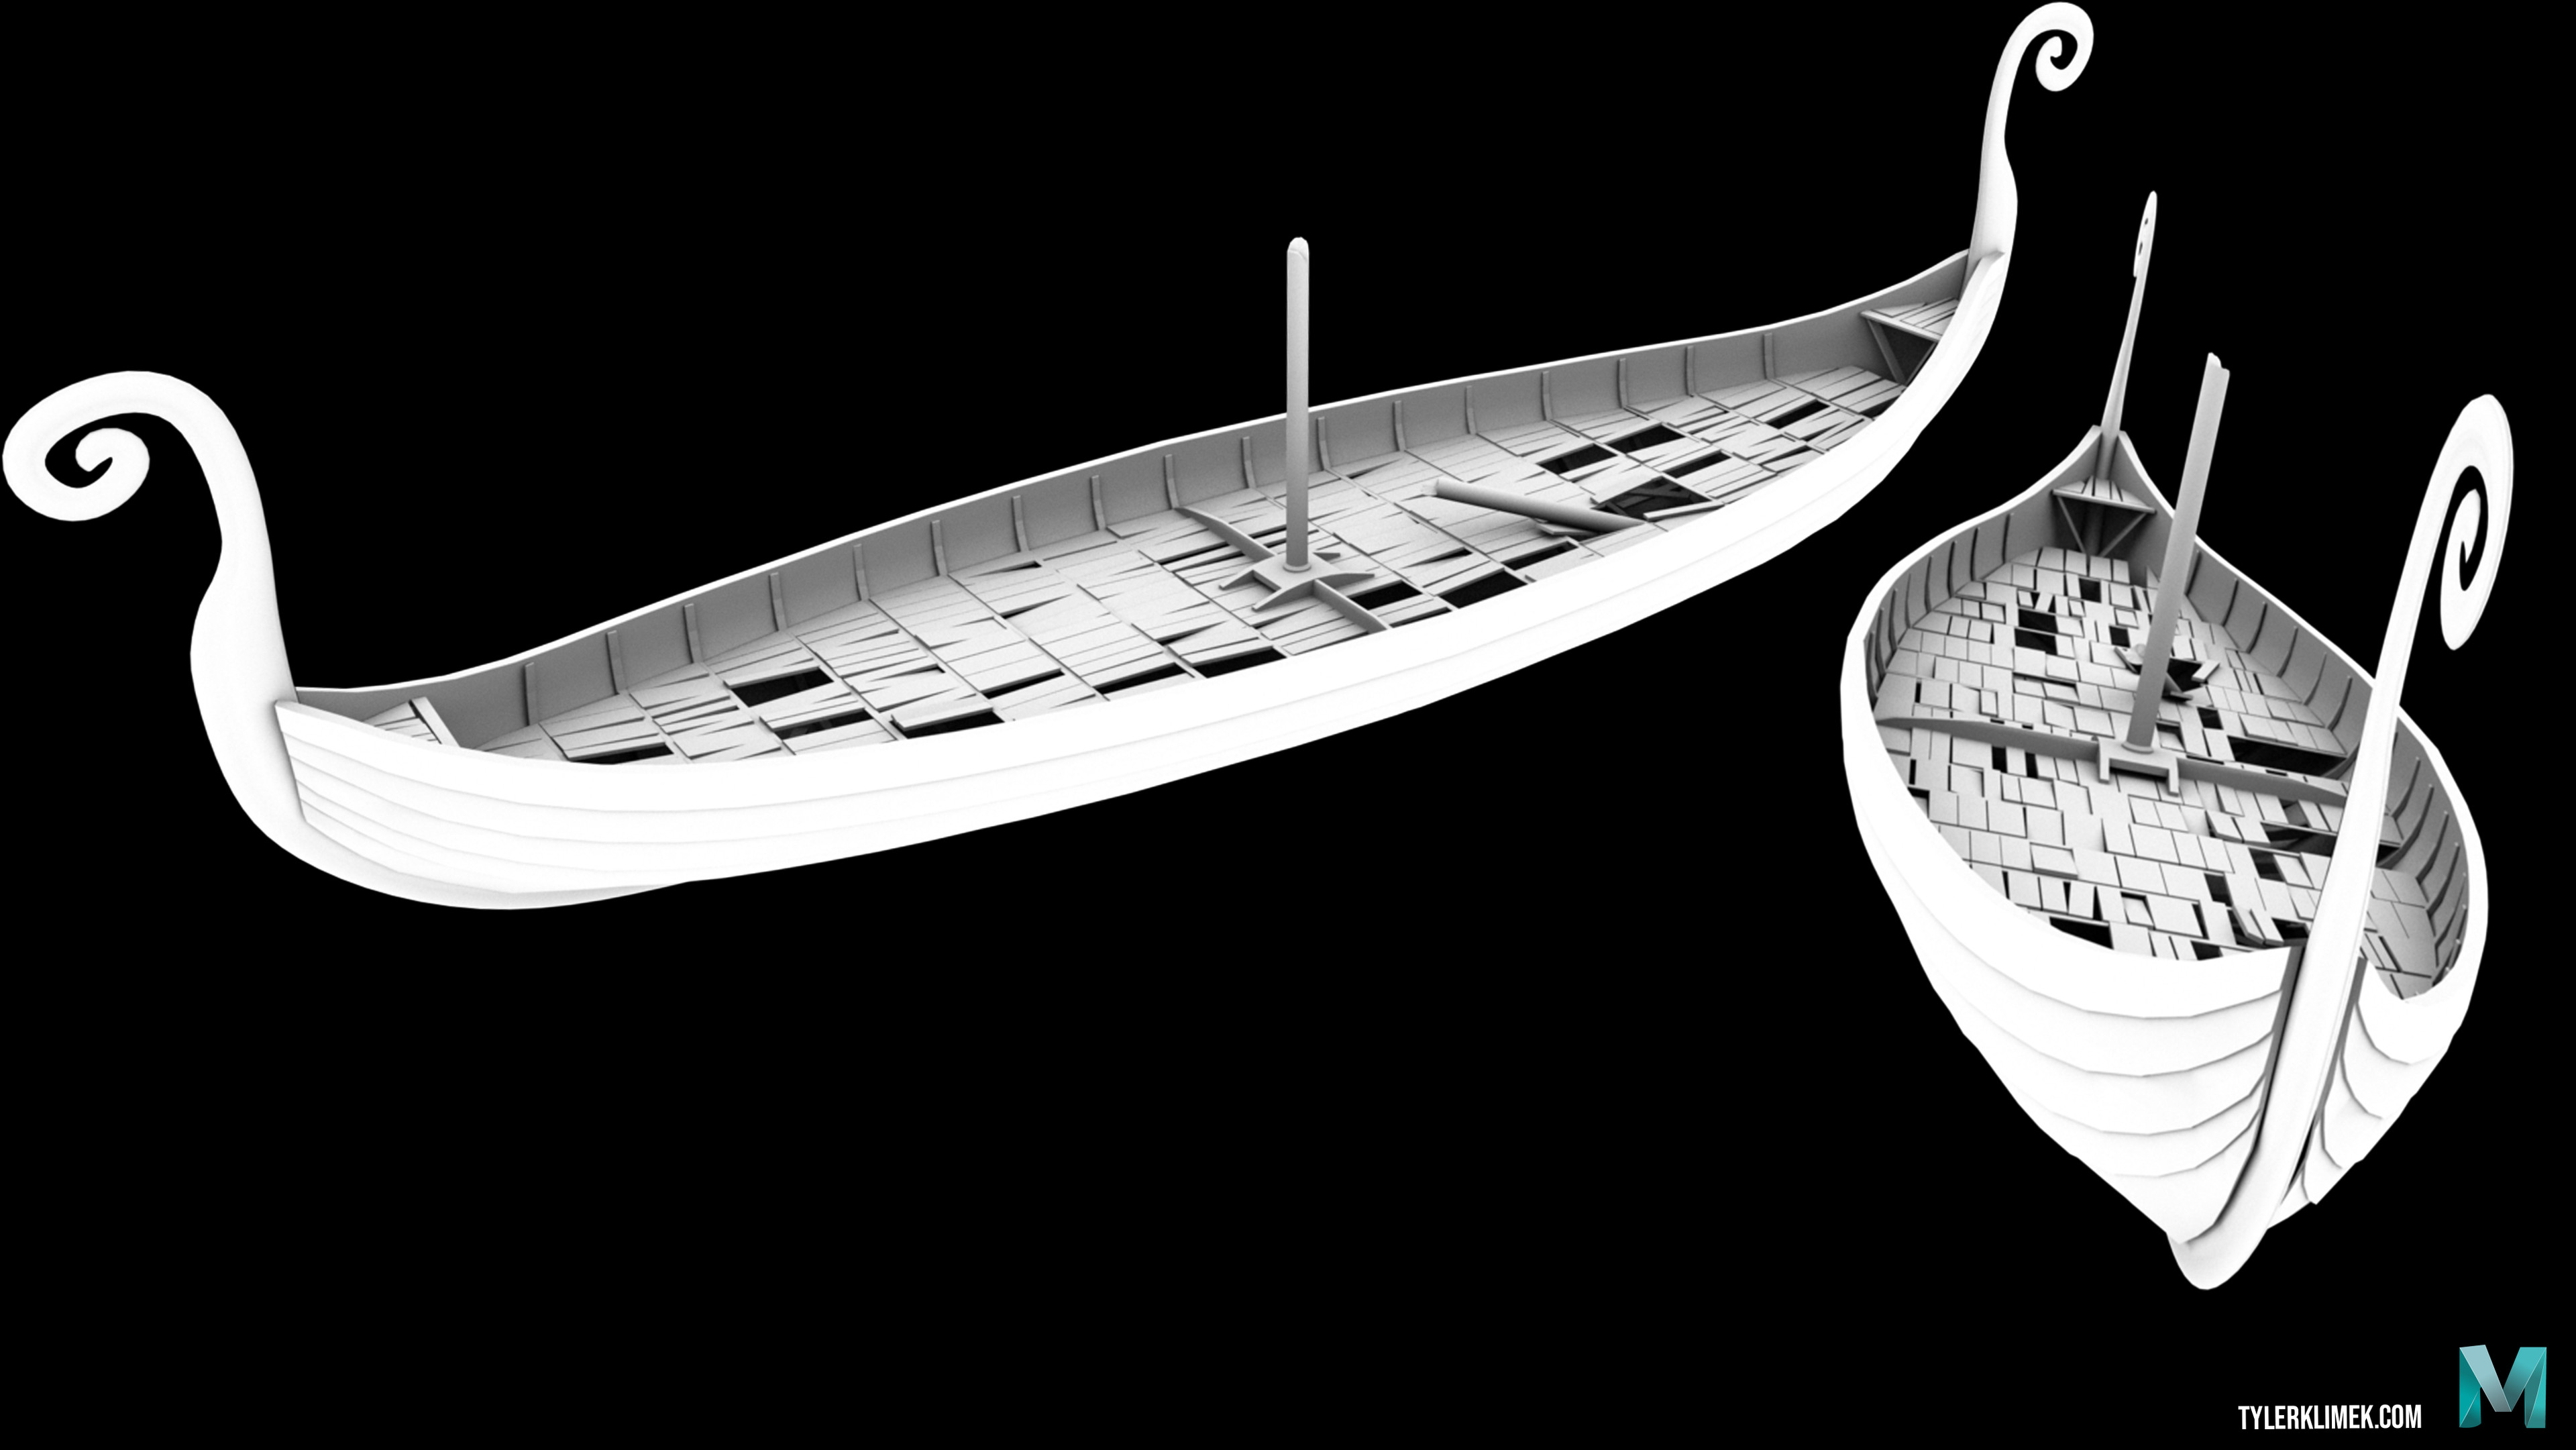 Occlusion renders of the viking long-ship